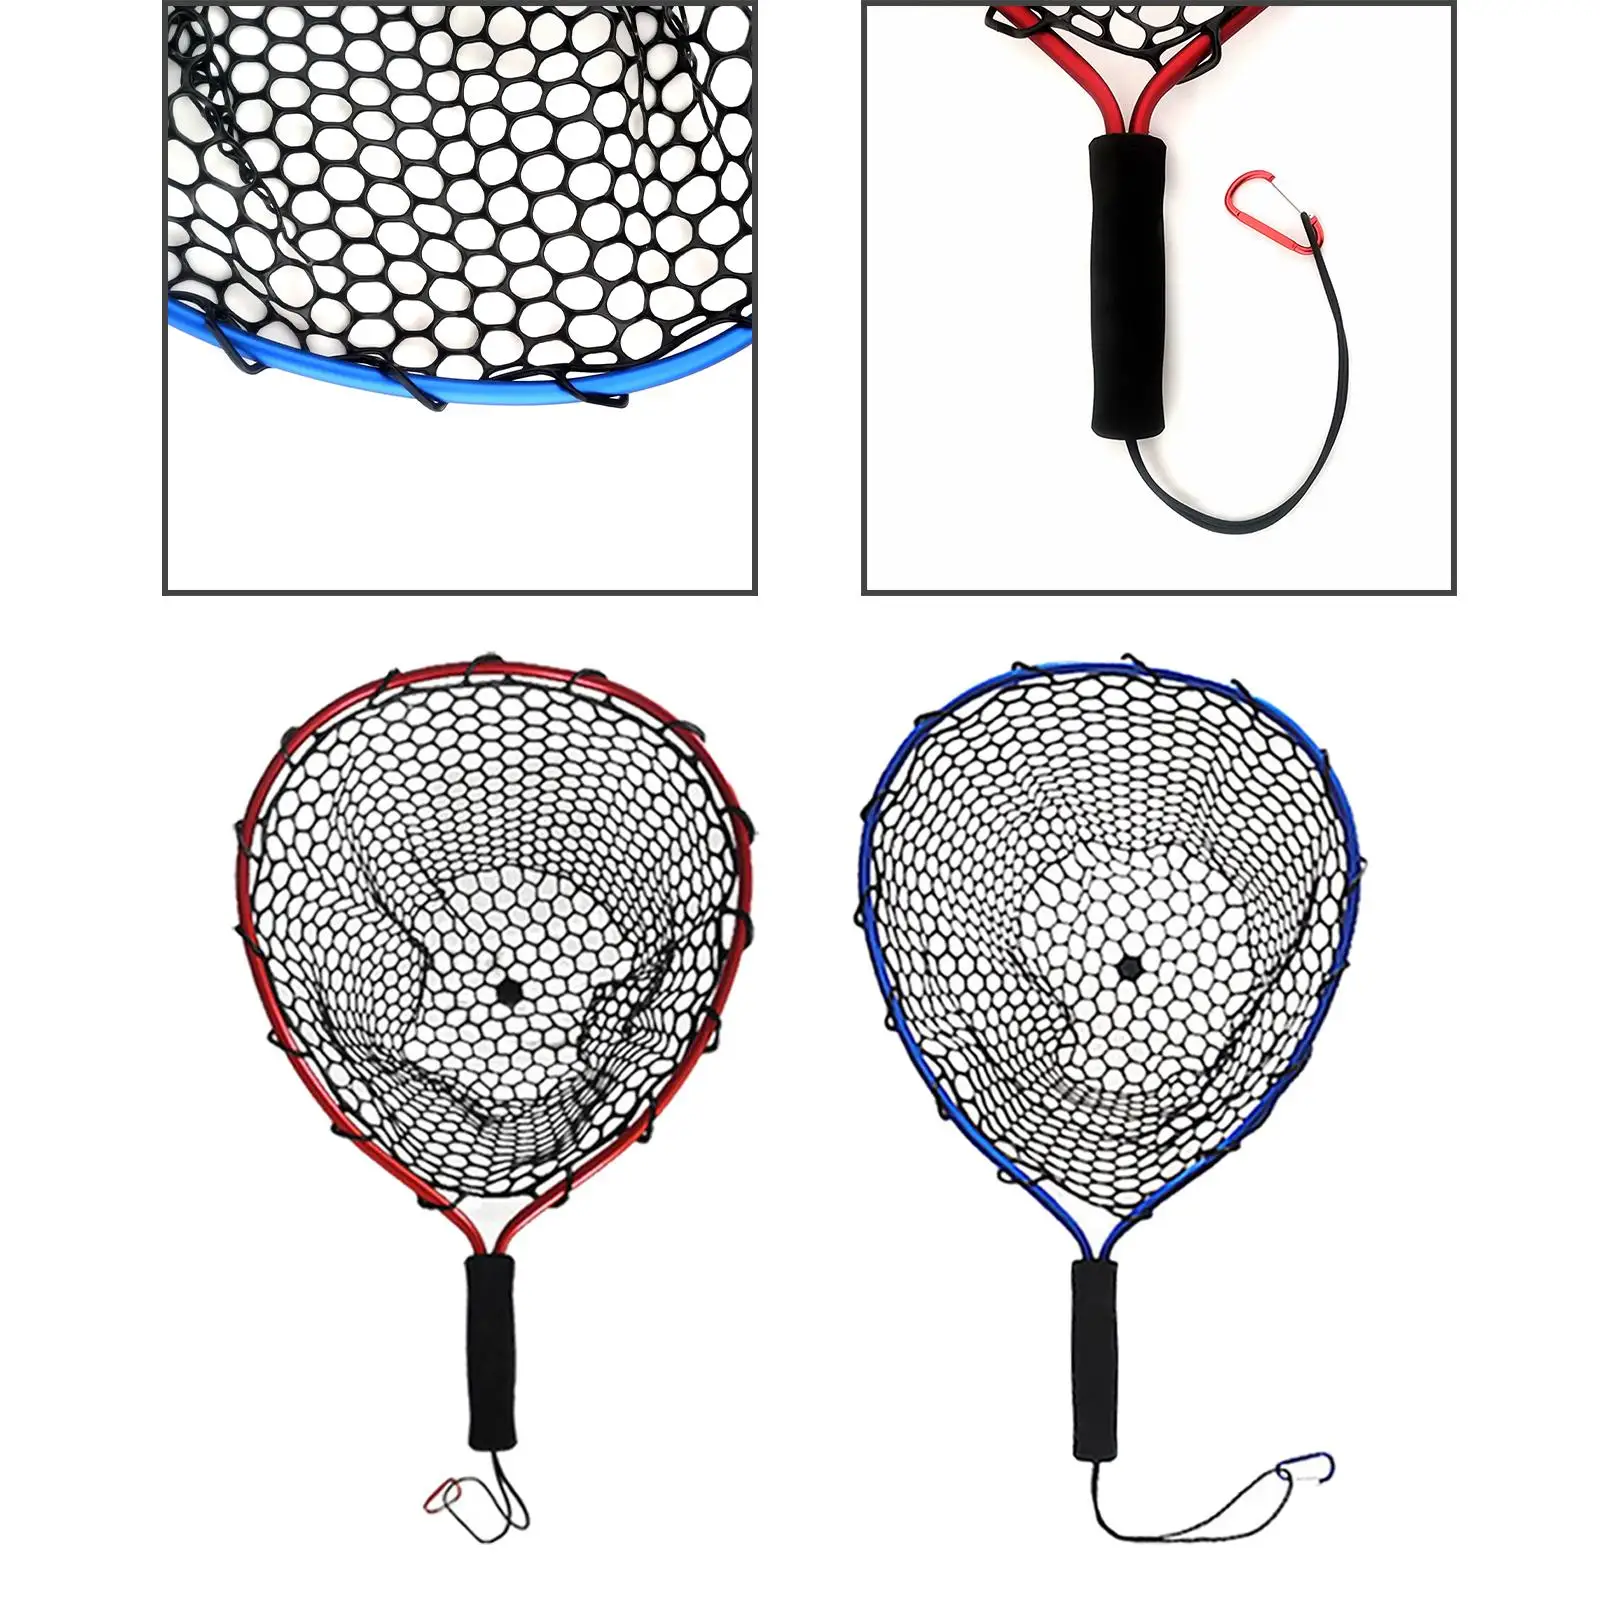 Fishing Landing Net with Lanyard and Carabiner Fish Catching Net Aluminum Alloy Frame Wading Net for Boat Fishing Accessories